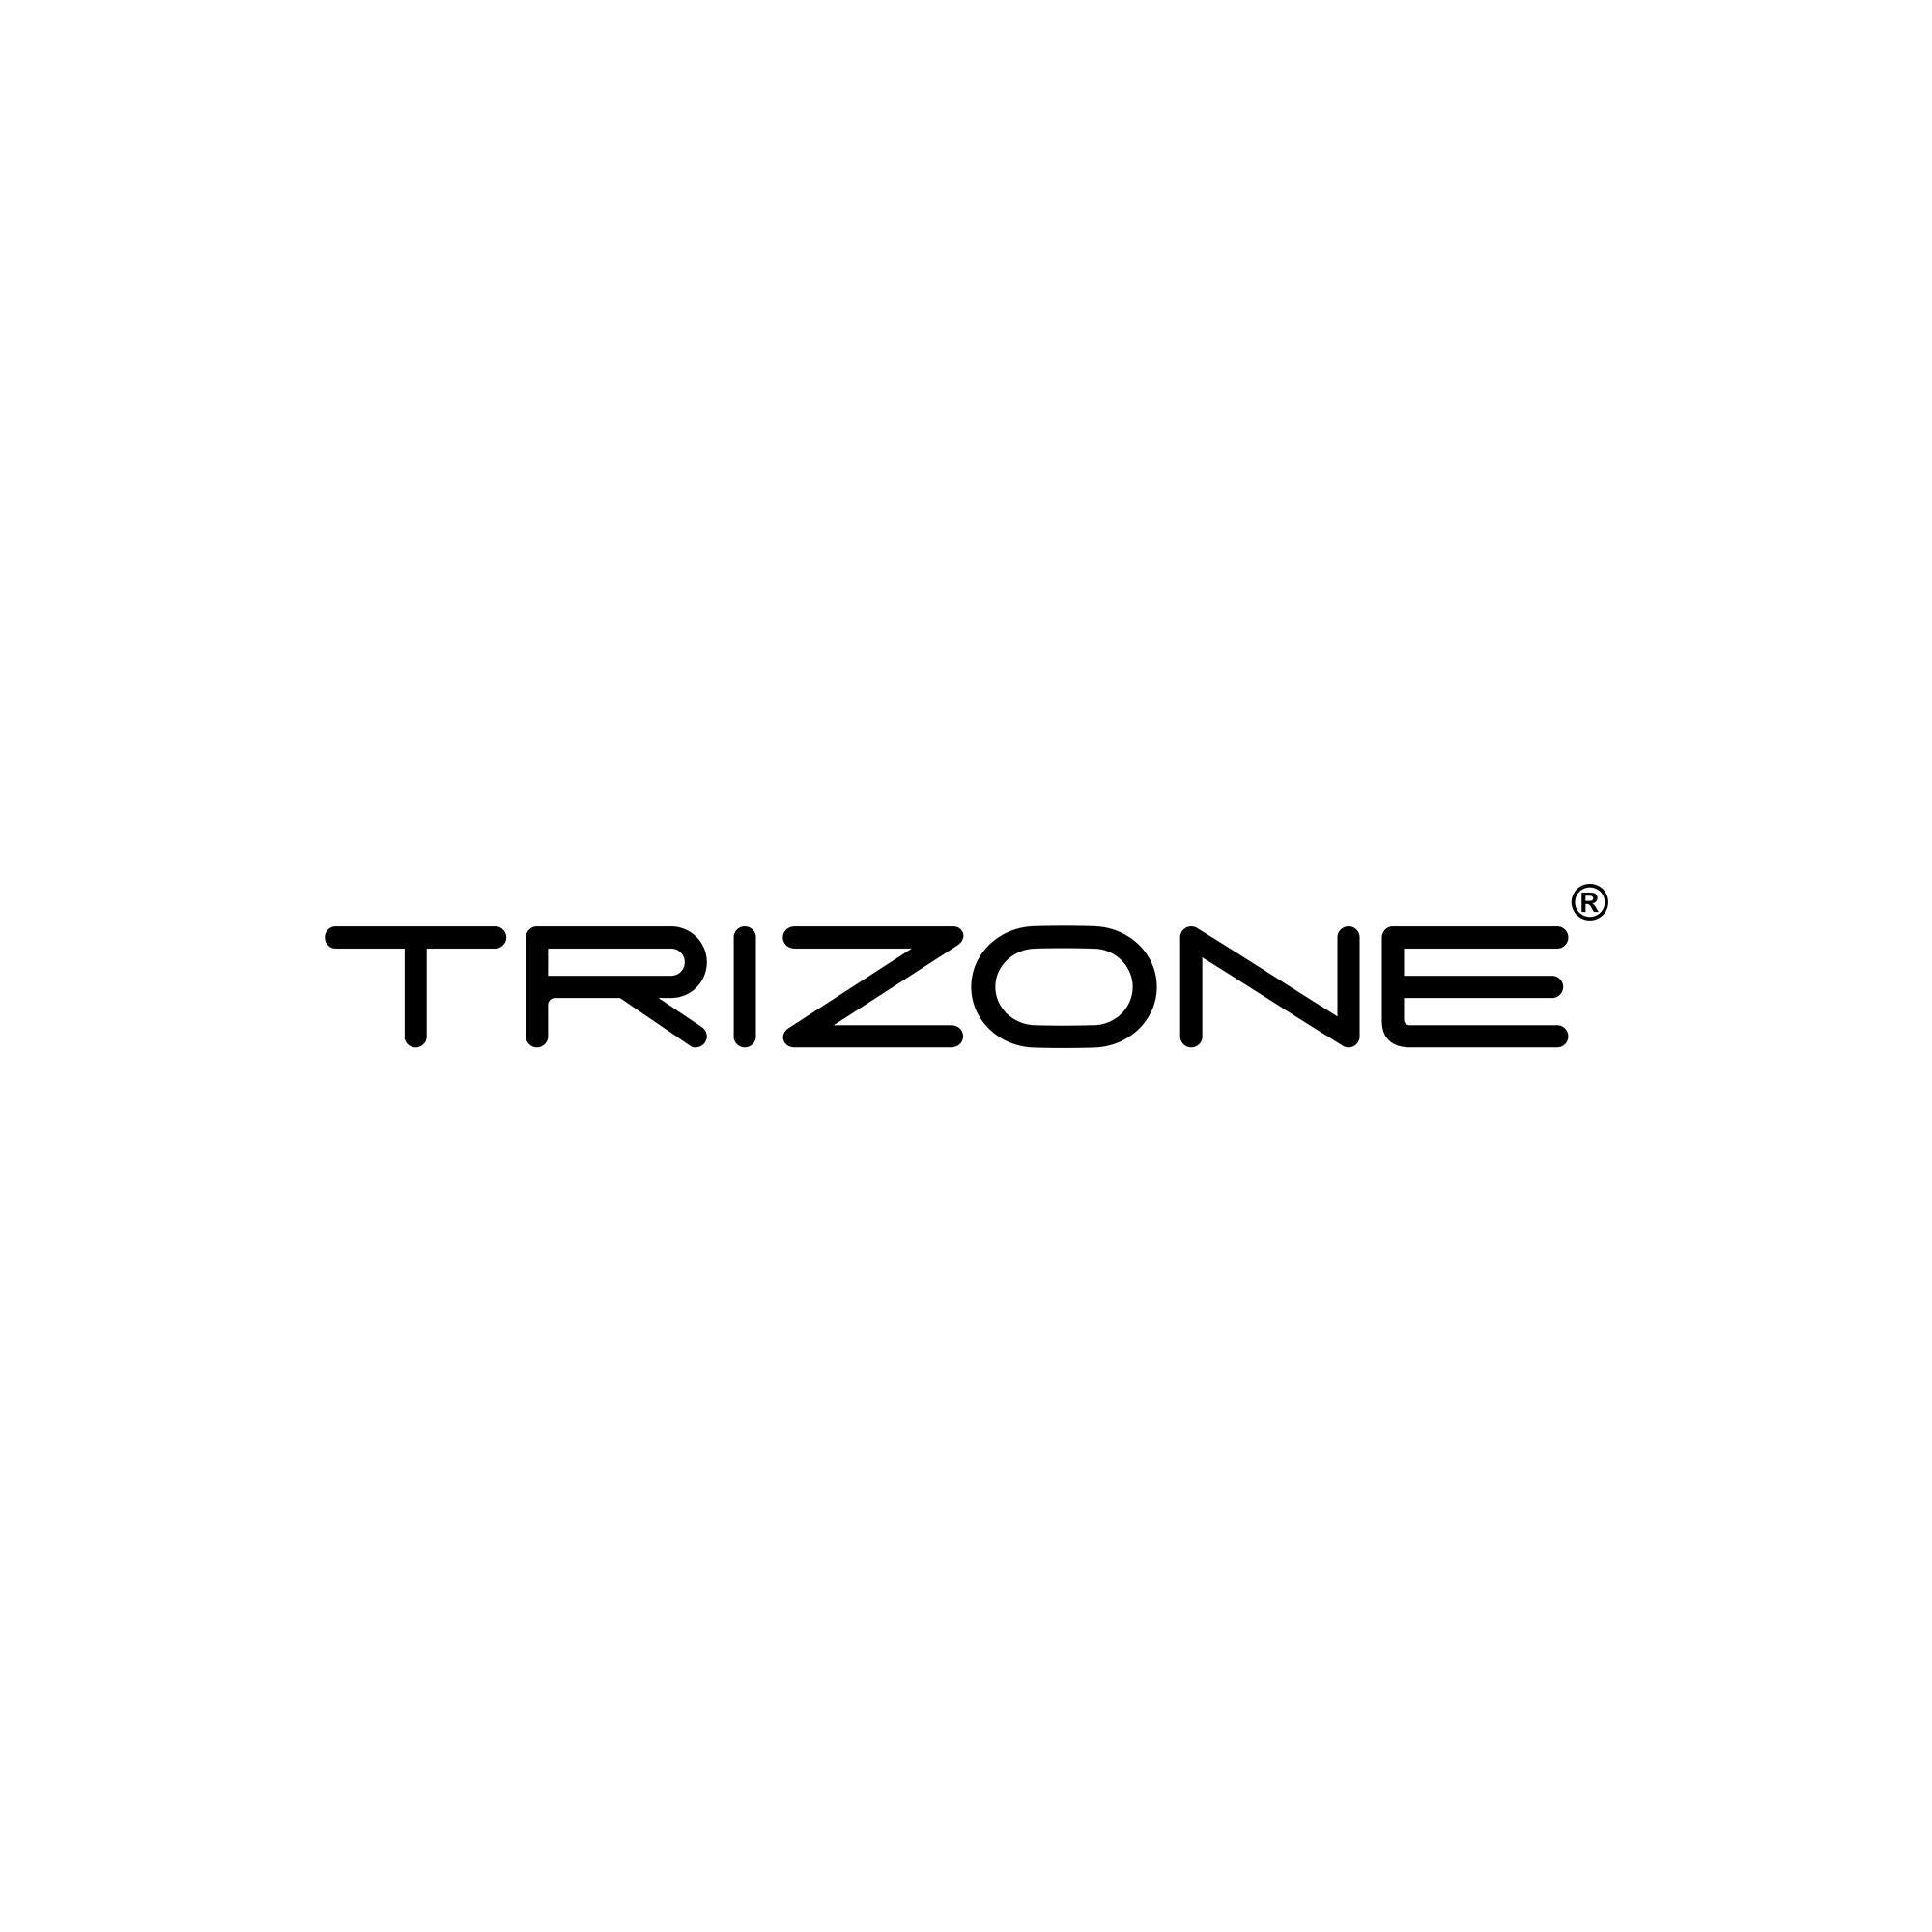 Trizone India - Advertising and Branding Agency in Vadodara|Accounting Services|Professional Services